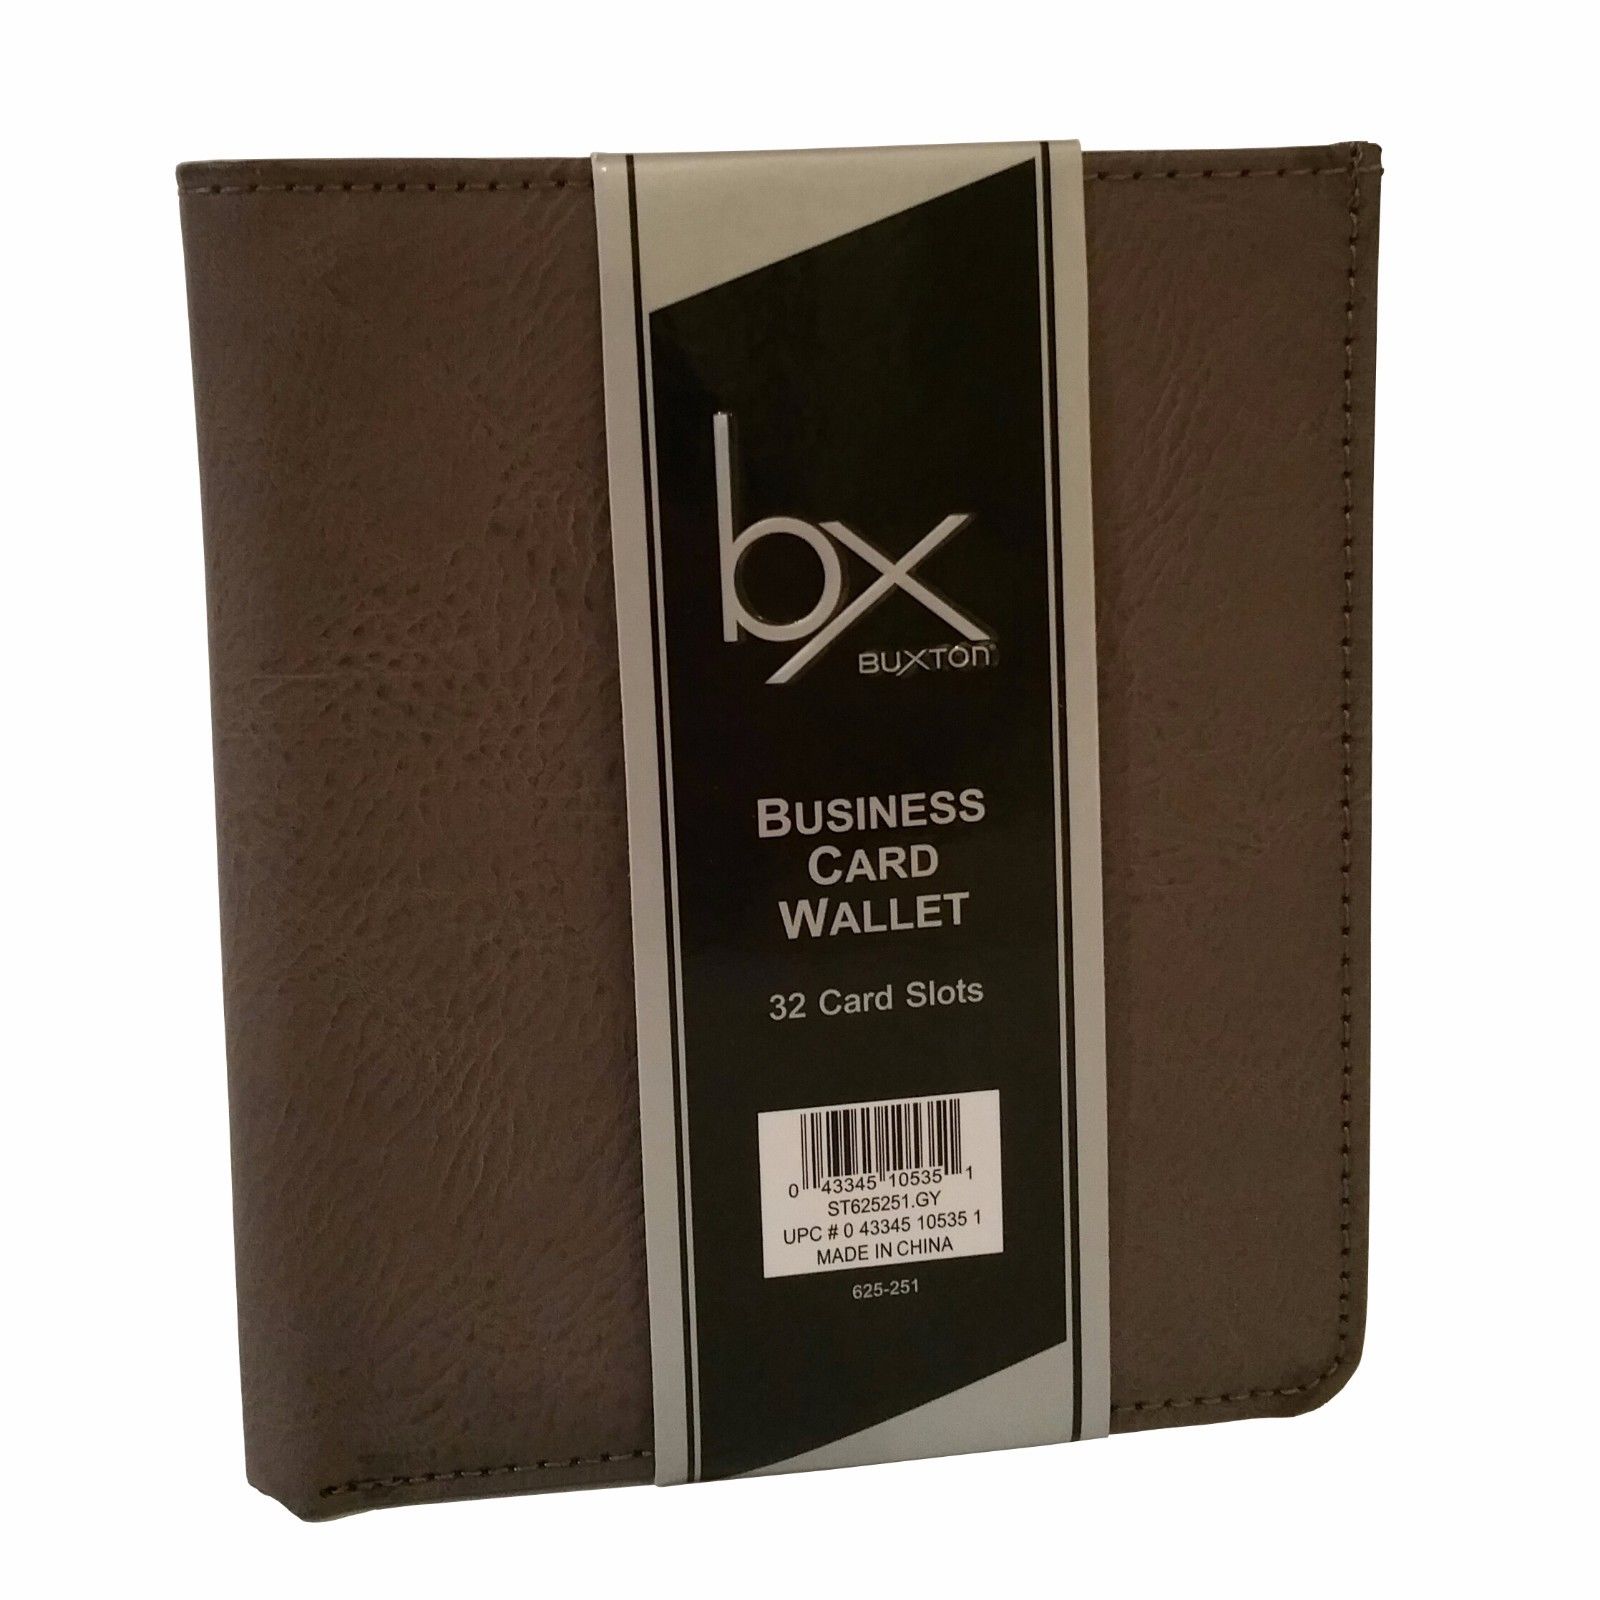 Business Card Wallet 32 Card Slots - Xtreme eDeals